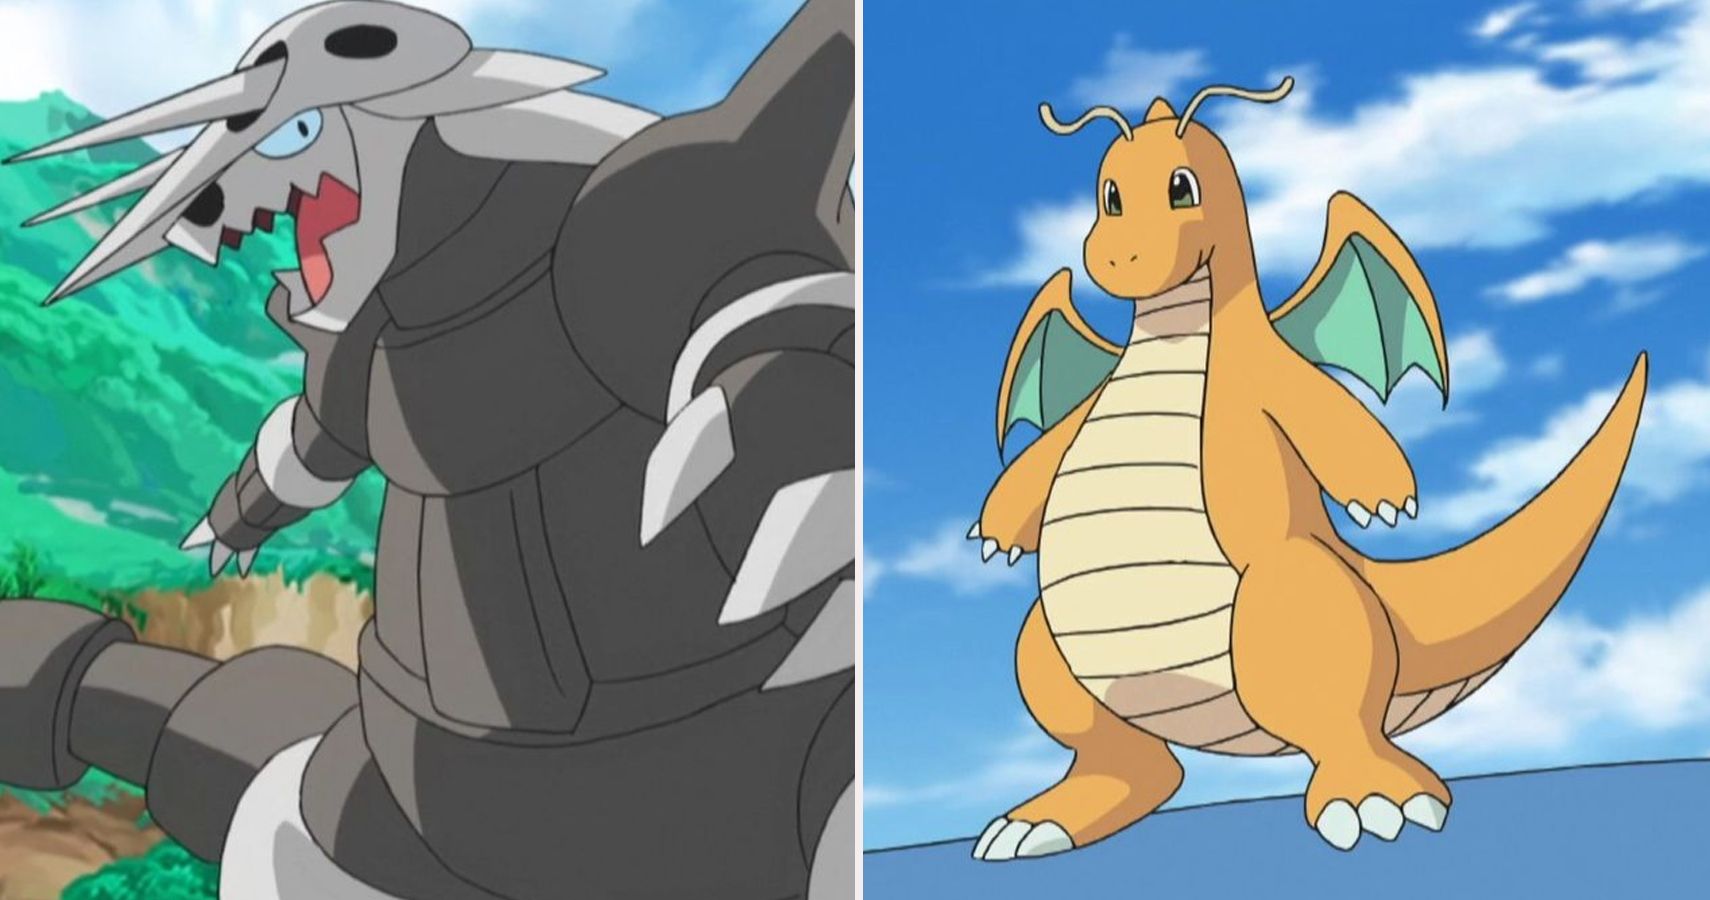 10 Old Pokémon We Want To See In Sword & Shield DLC